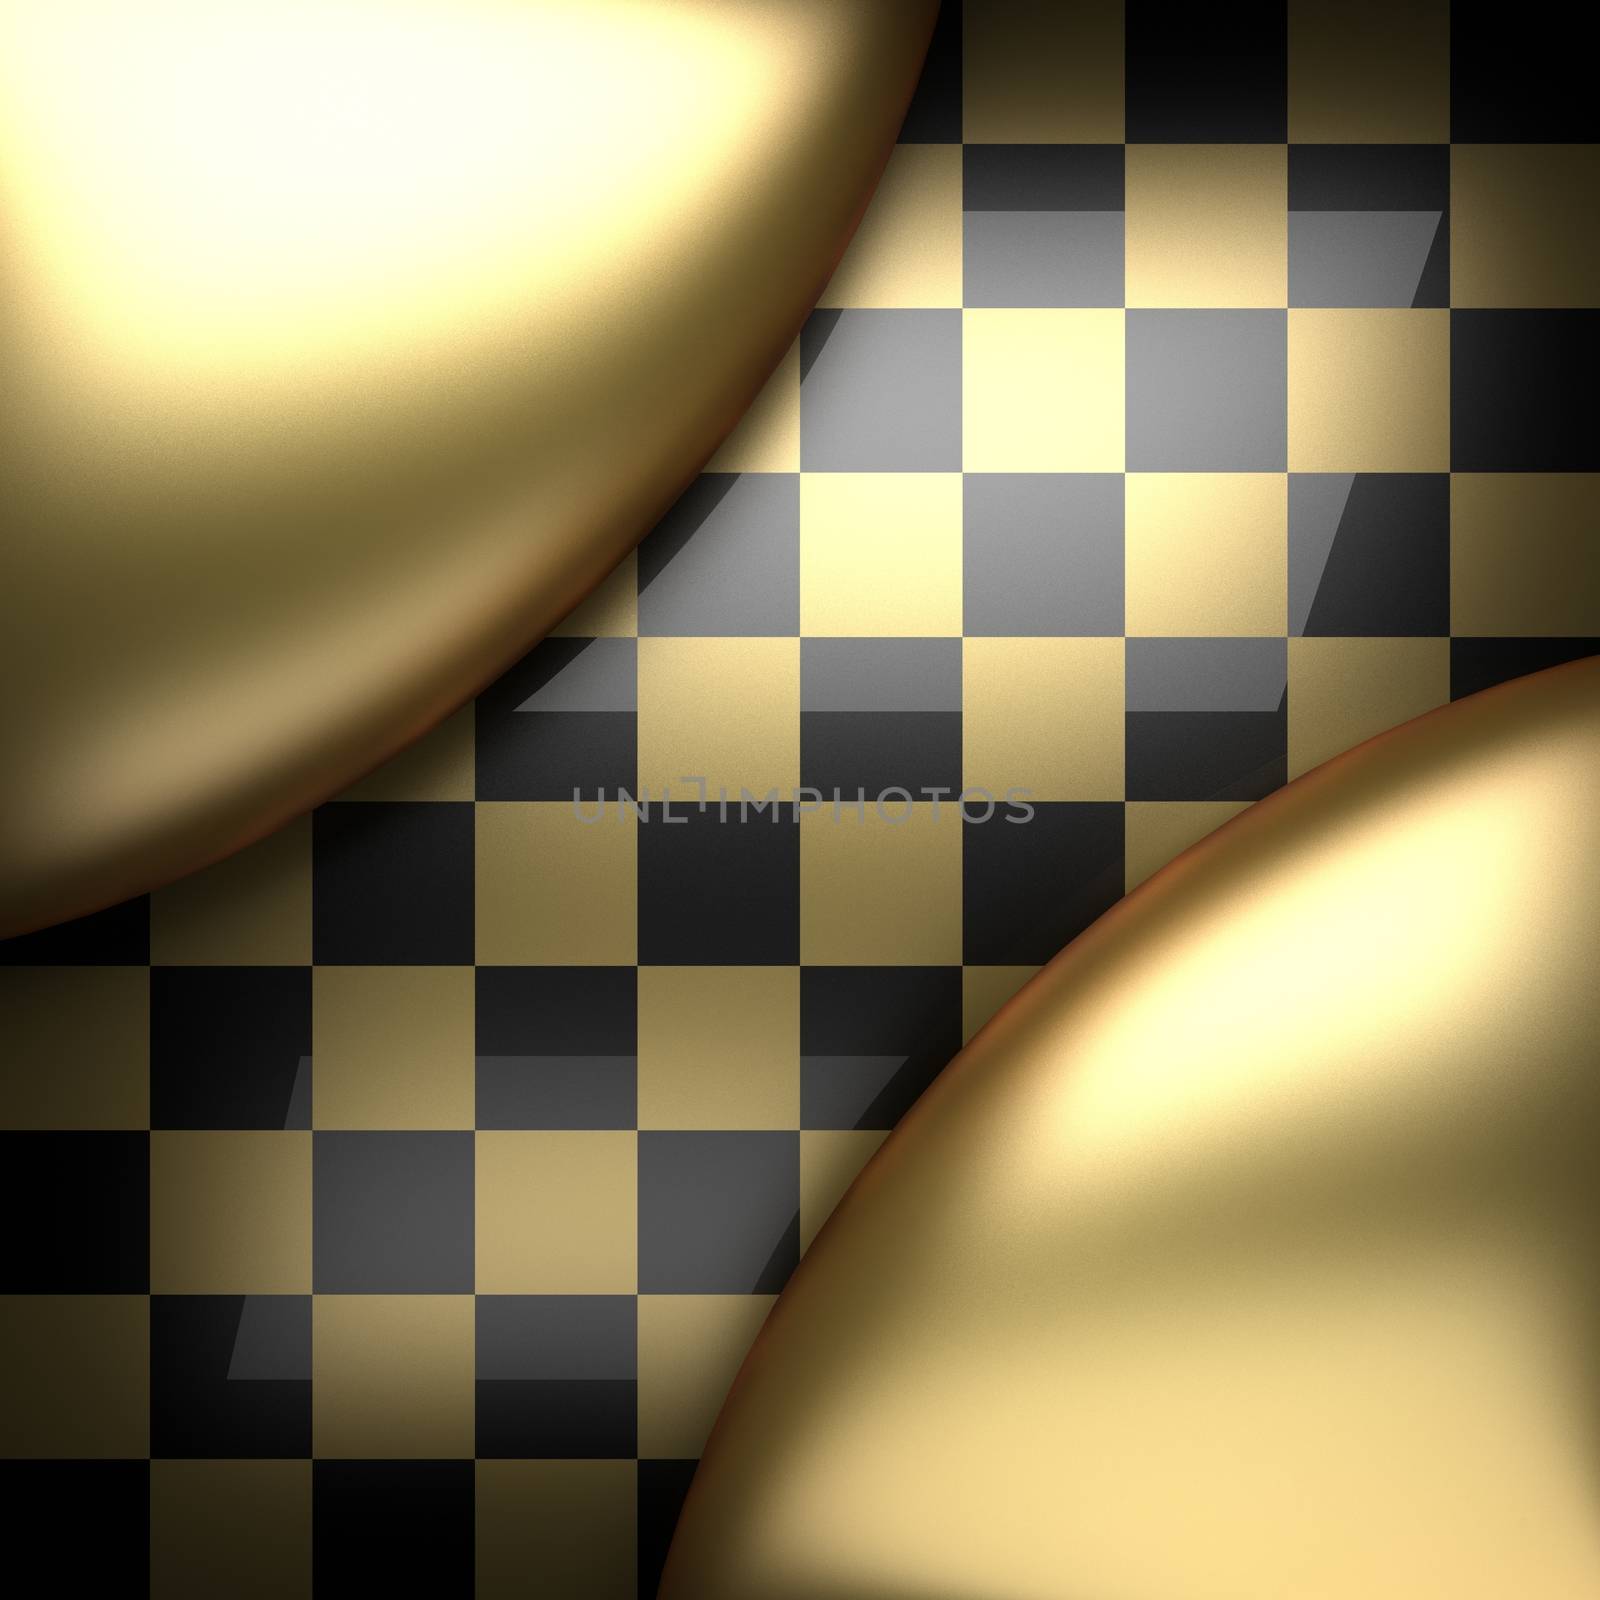 polished golden and black background by videodoctor